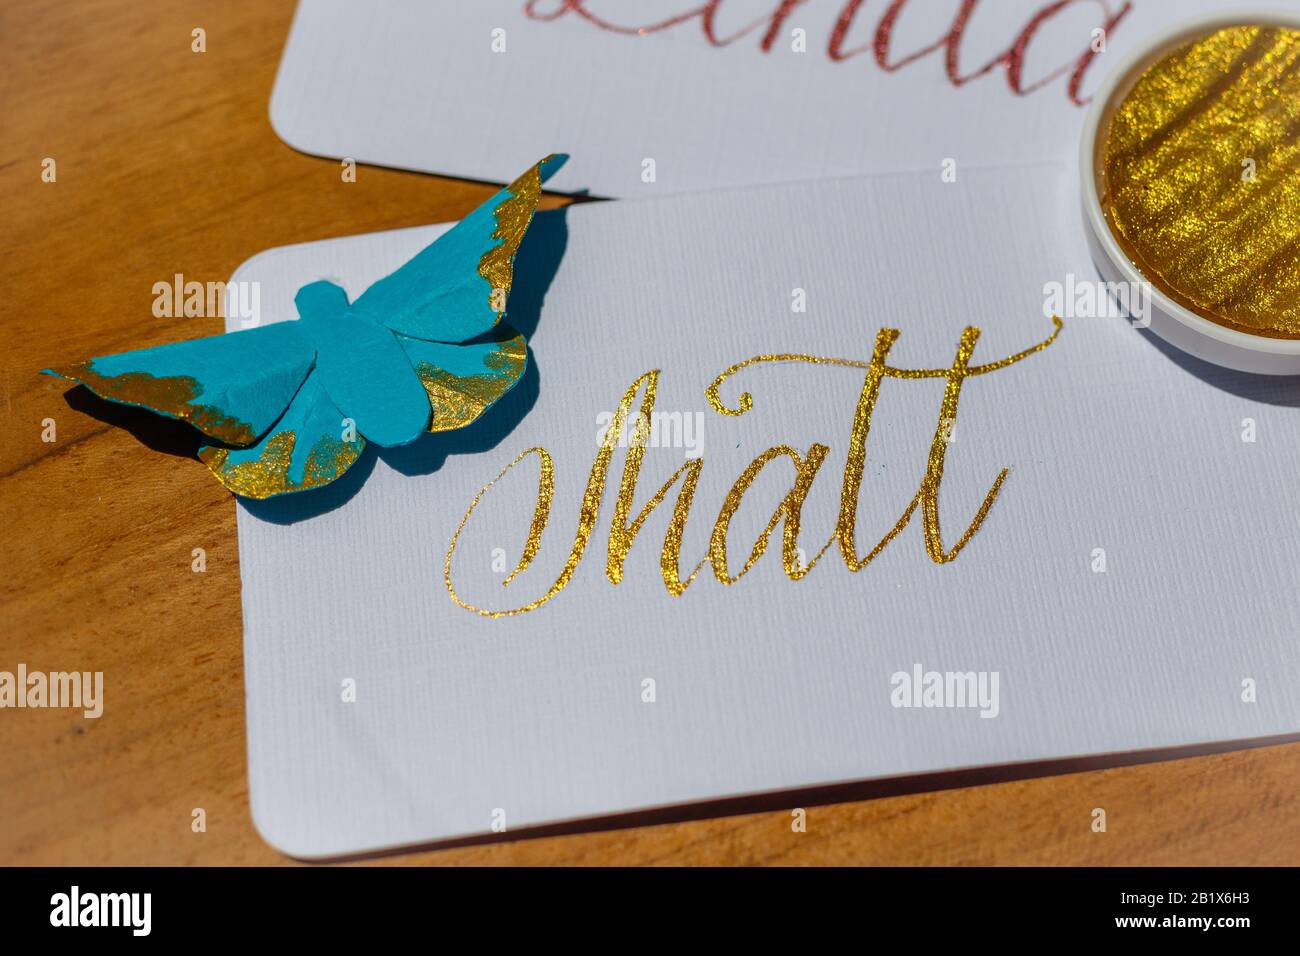 Wedding calligraphy - handwritten place cards with names and paper butterflies. Golden writing on white paper. Stock Photo